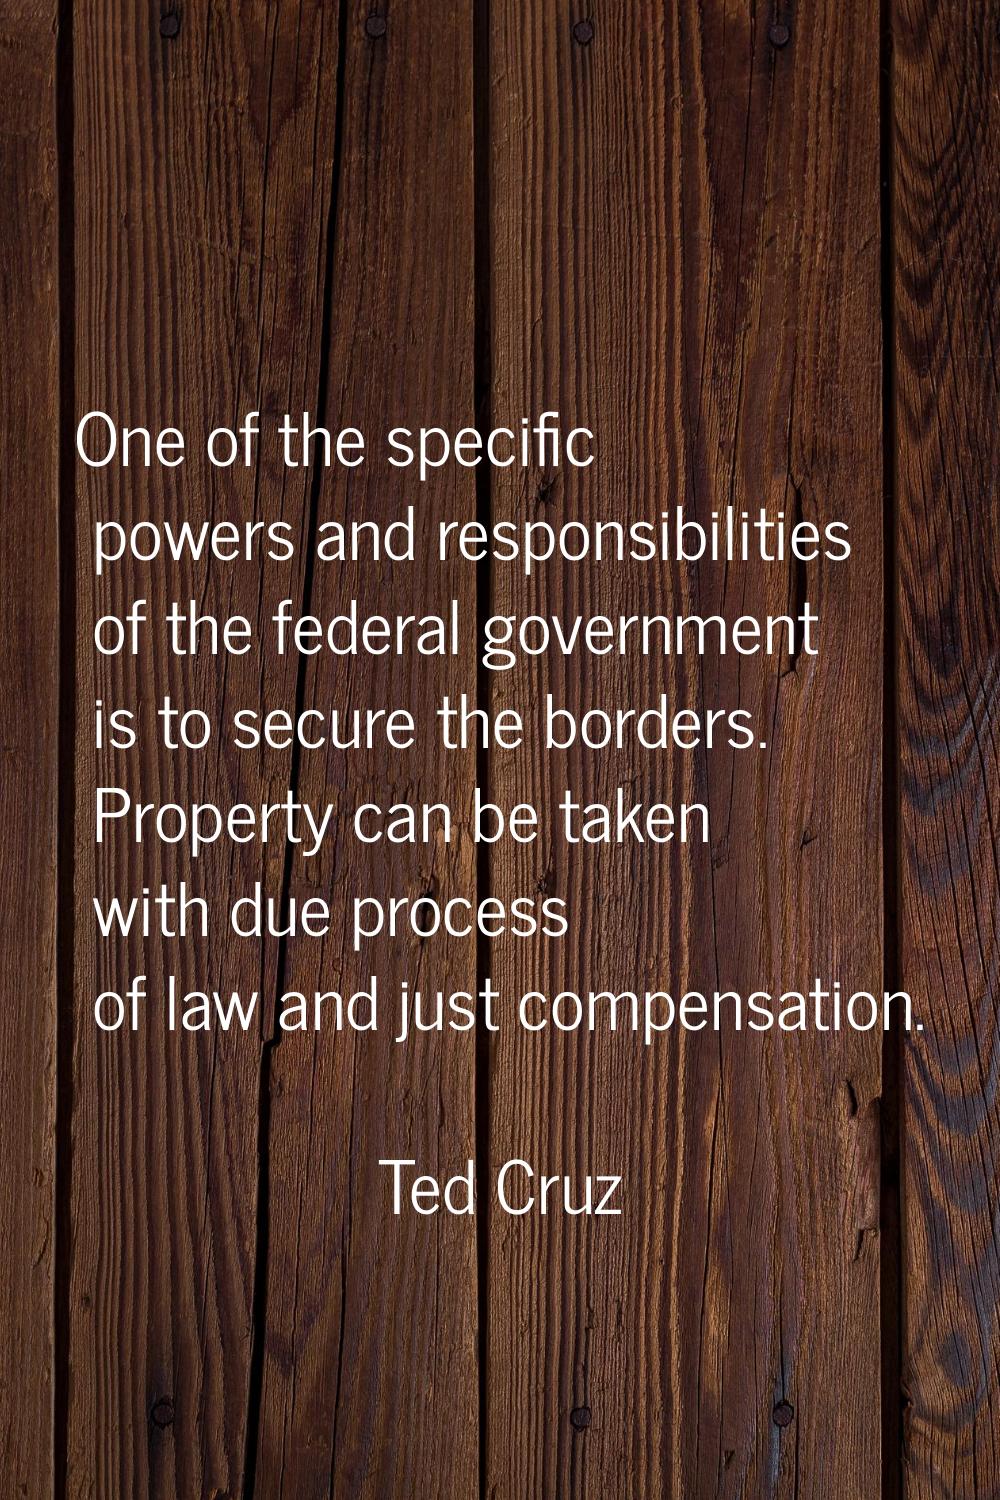 One of the specific powers and responsibilities of the federal government is to secure the borders.